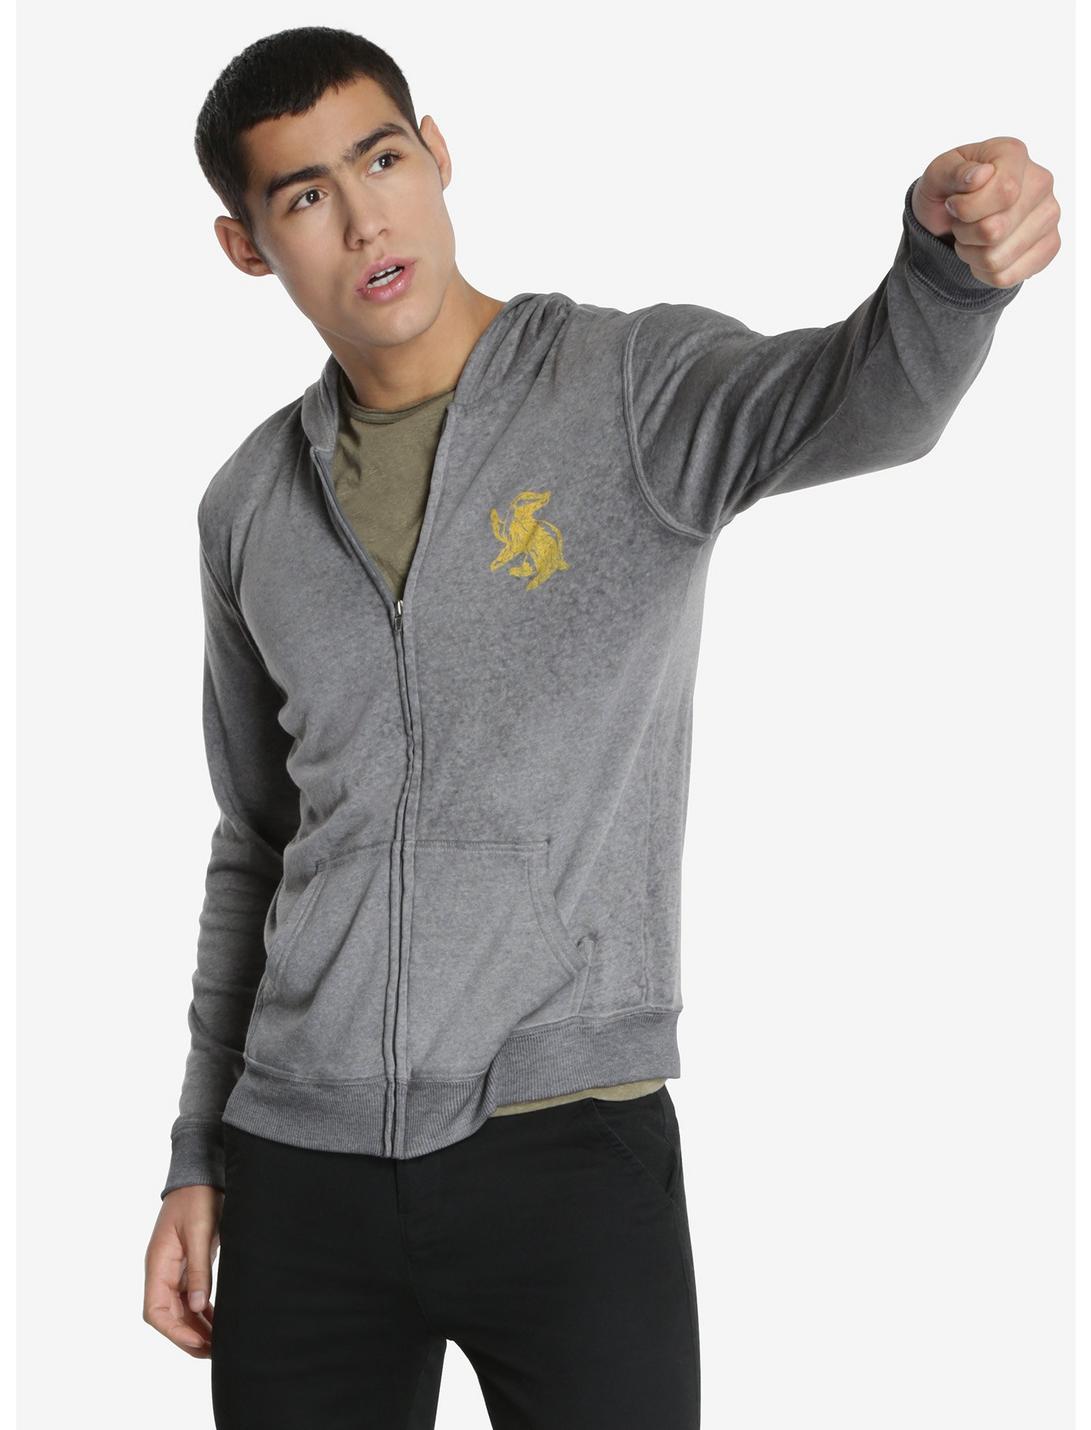 Harry Potter Hufflepuff Quidditch Captain Hoodie, GREY, hi-res